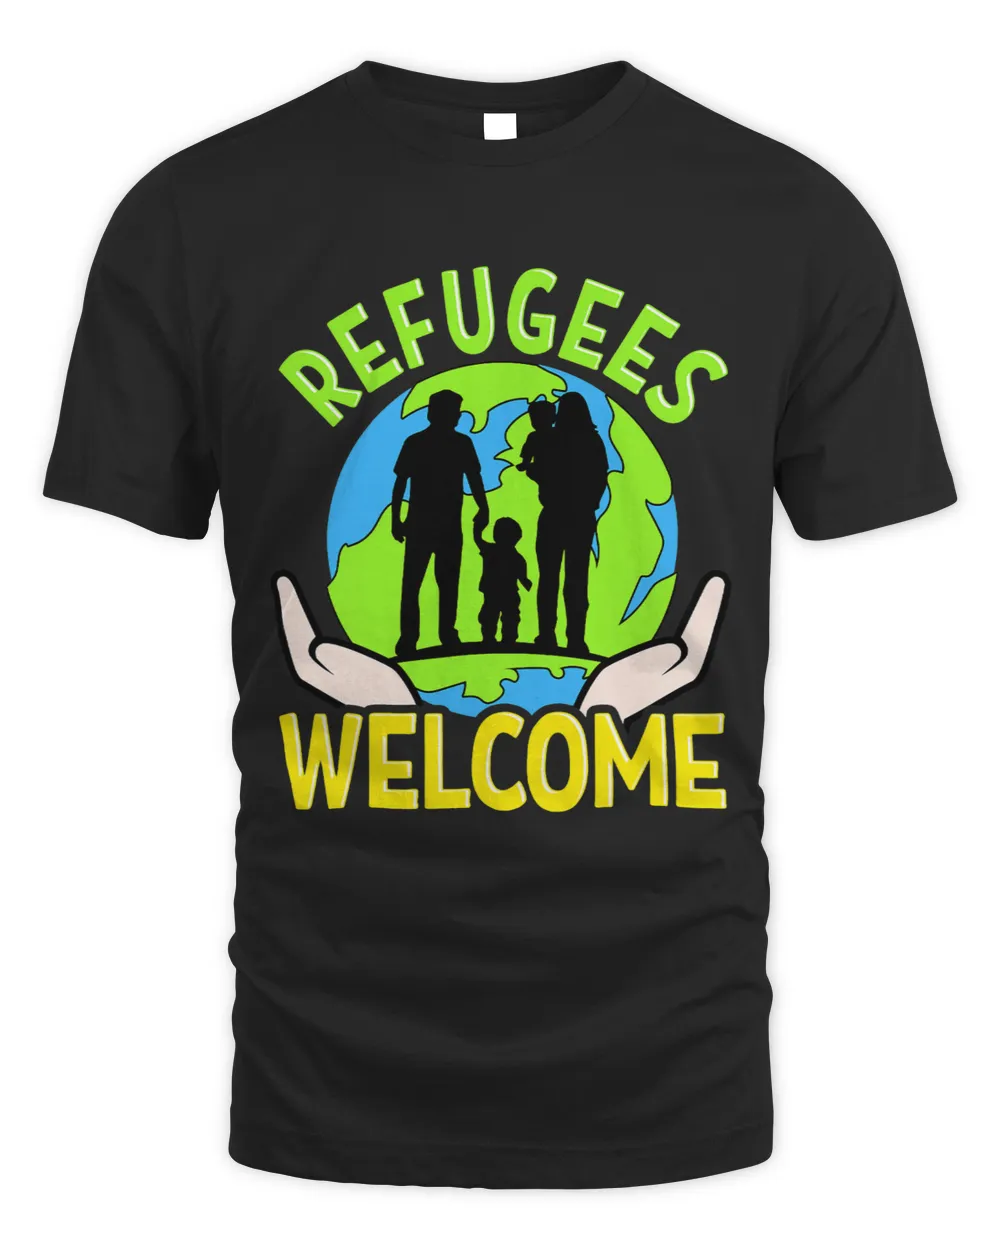 Refugees Welcome Pro Immigrant Liberal Family Anti War